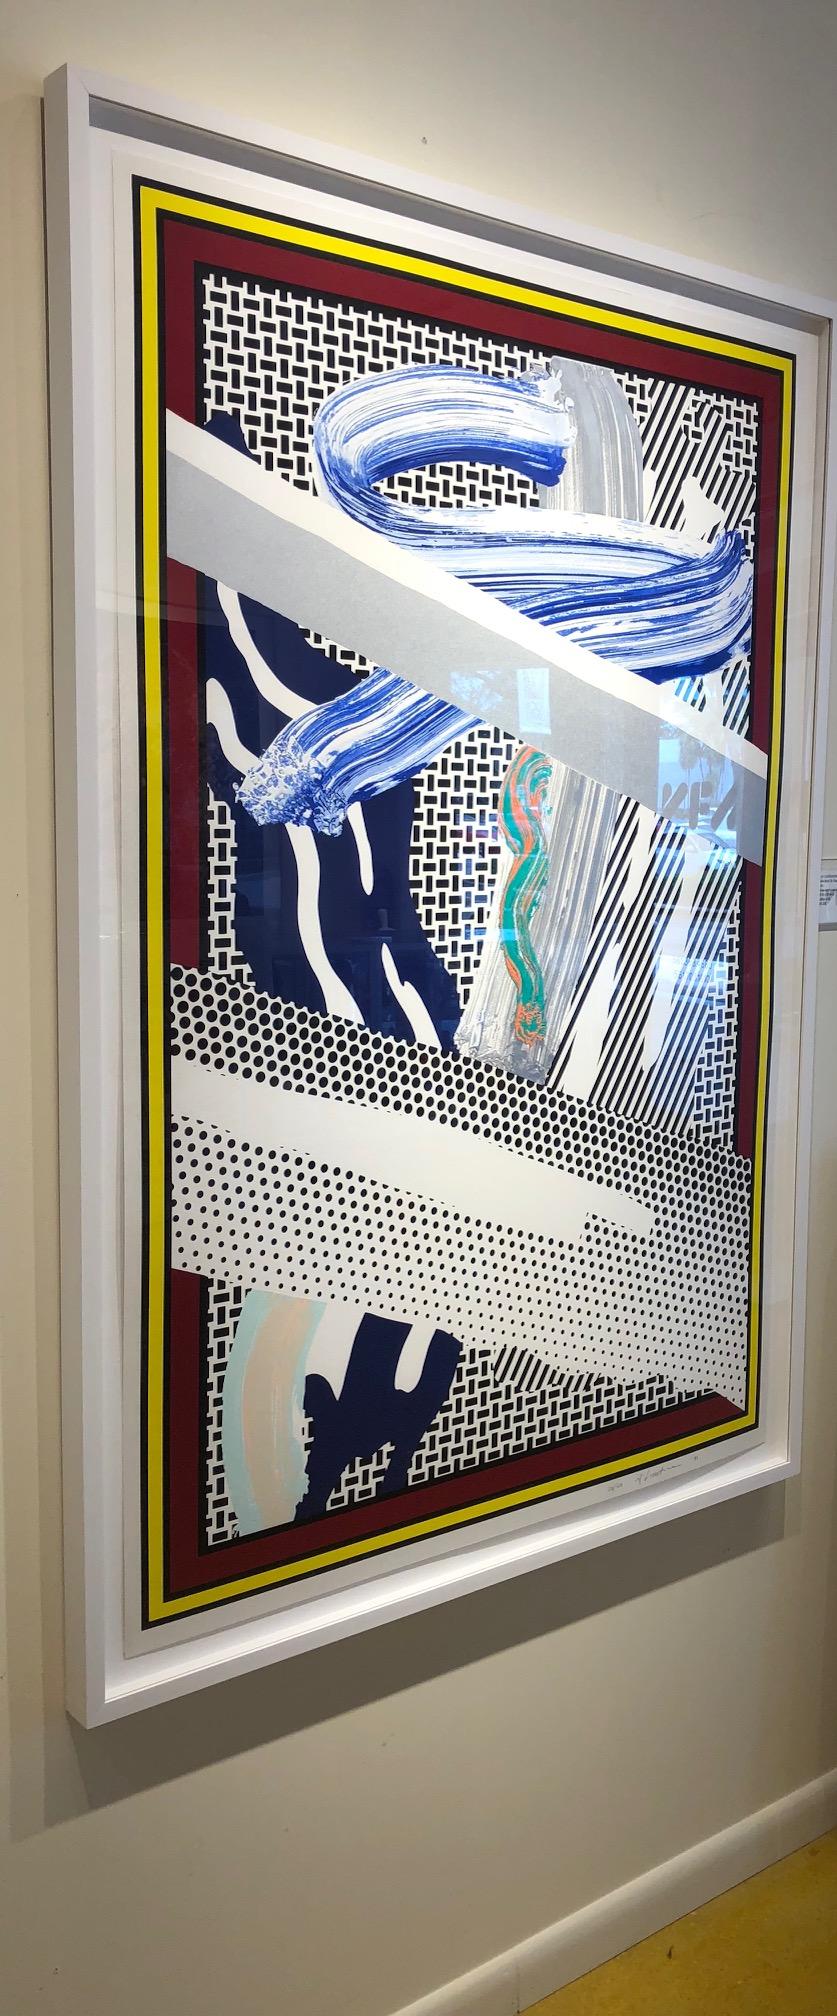 Reflections on Expressionist Painting - Contemporary Print by Roy Lichtenstein